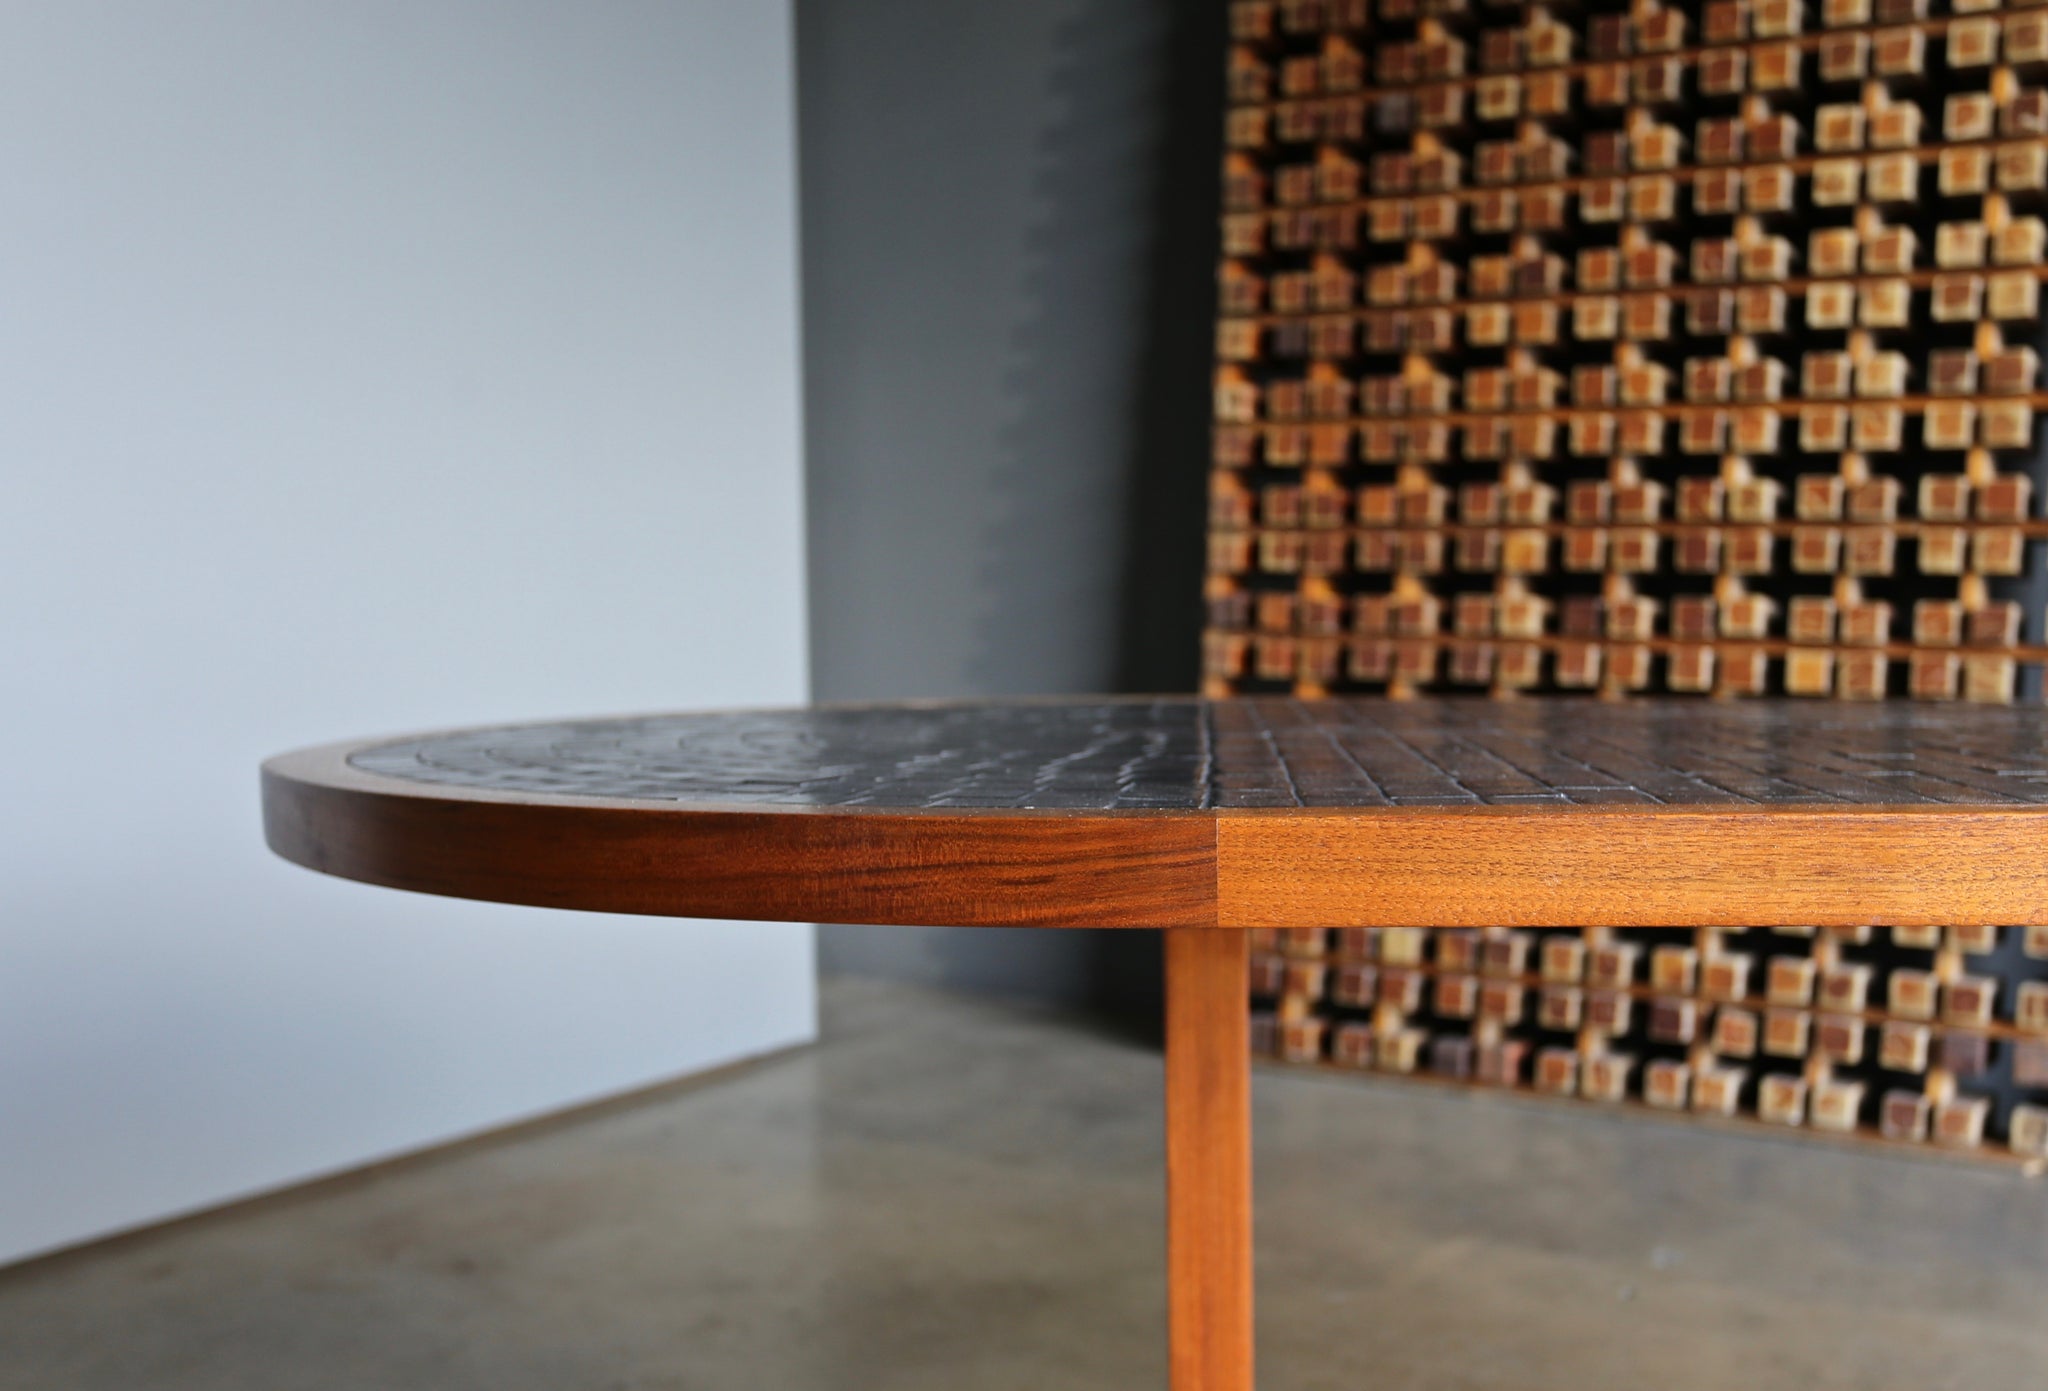 = SOLD = Gordon and Jane Martz Tile Top Dining / Game Table circa 1960